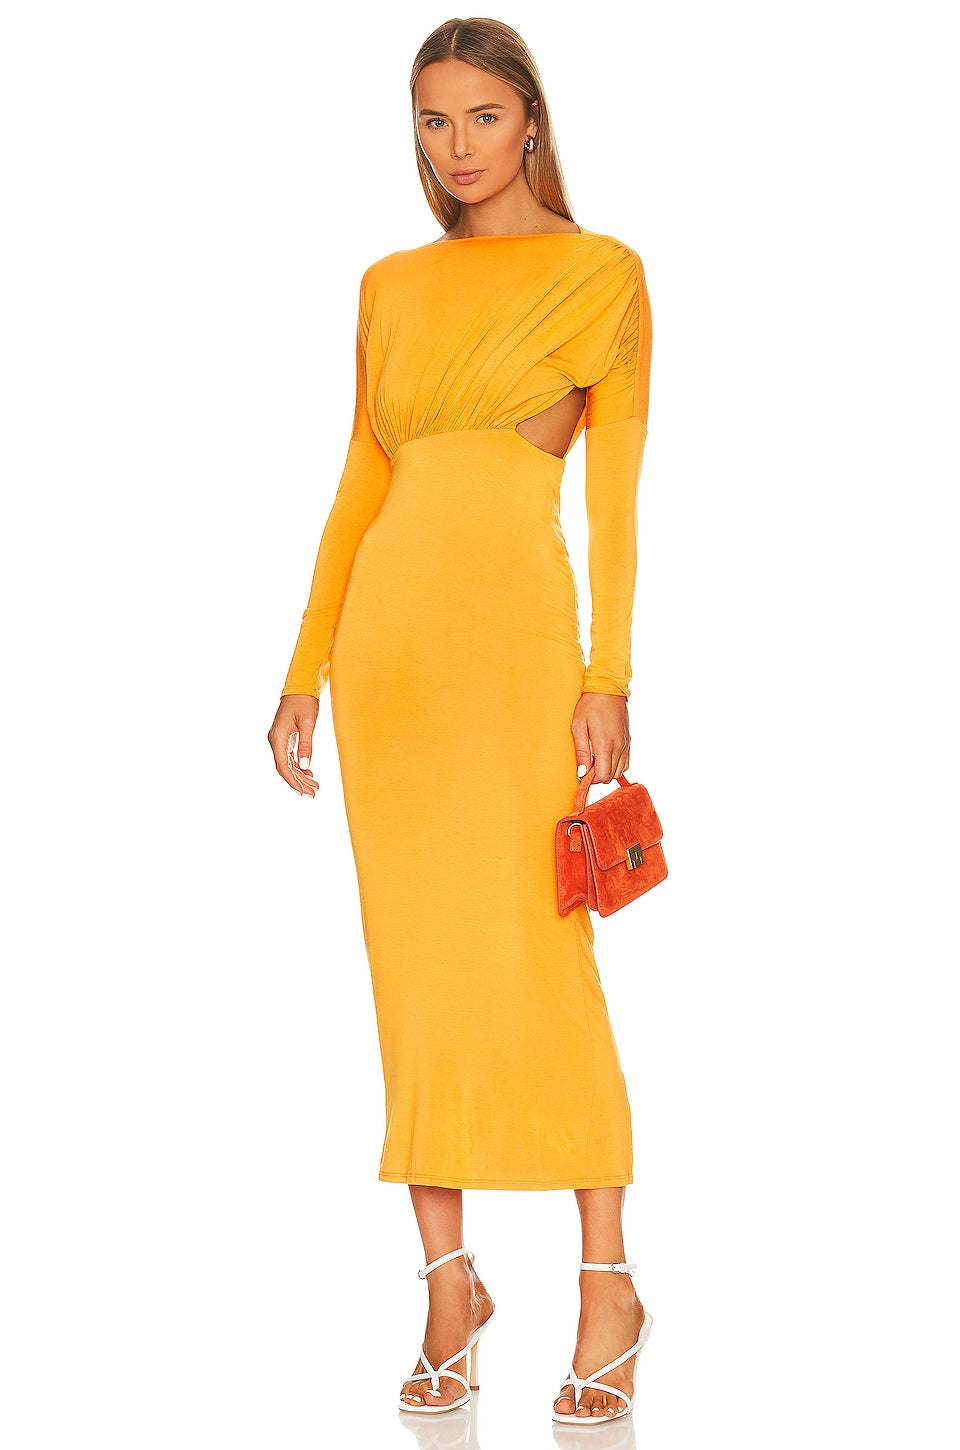 The Line by K Pascal Dress in Tangerine SIZE X-SMALL